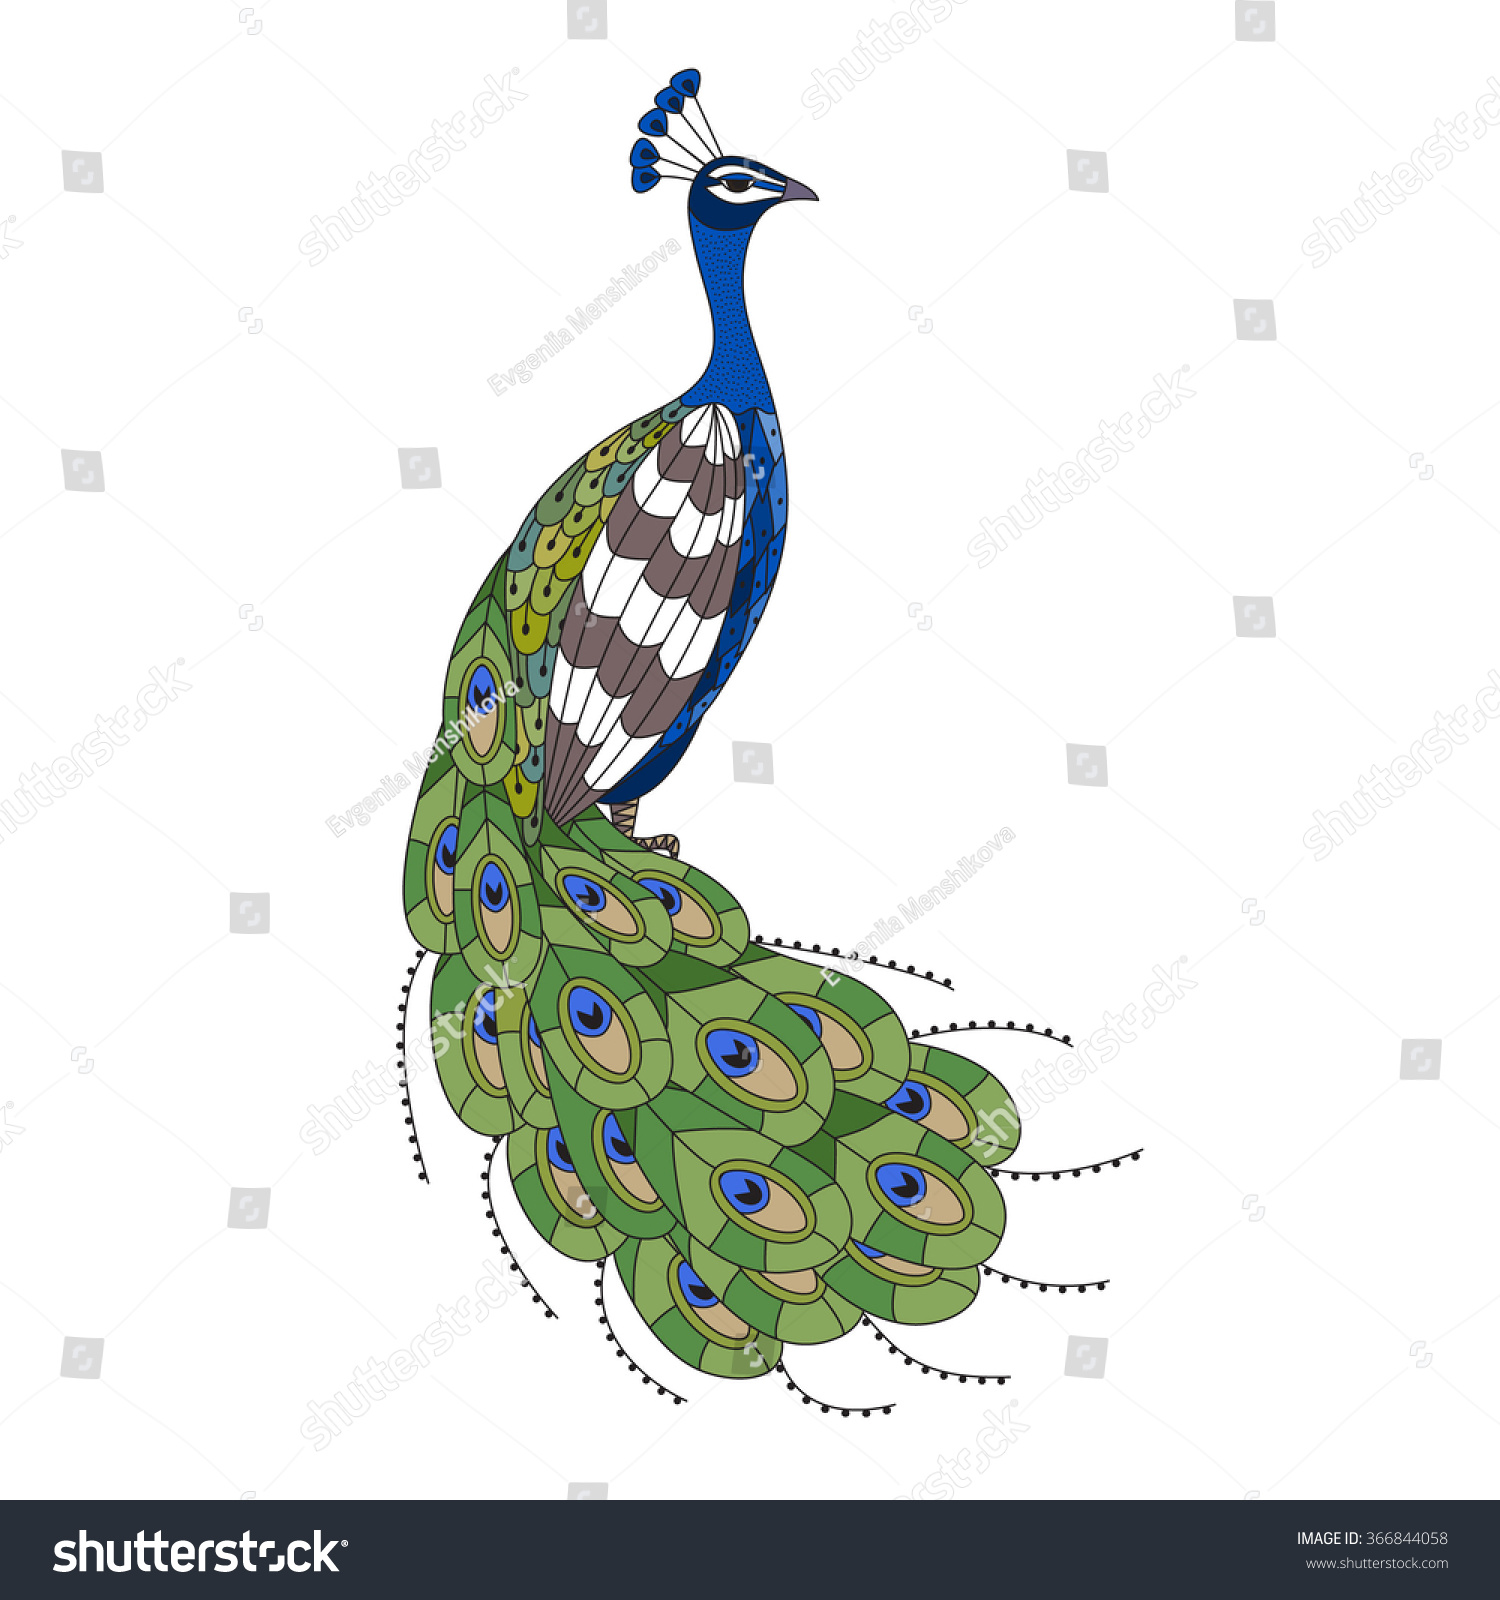 Hand Drawn Colorful Peacock Illustration Zentangle Stock Vector HD ...